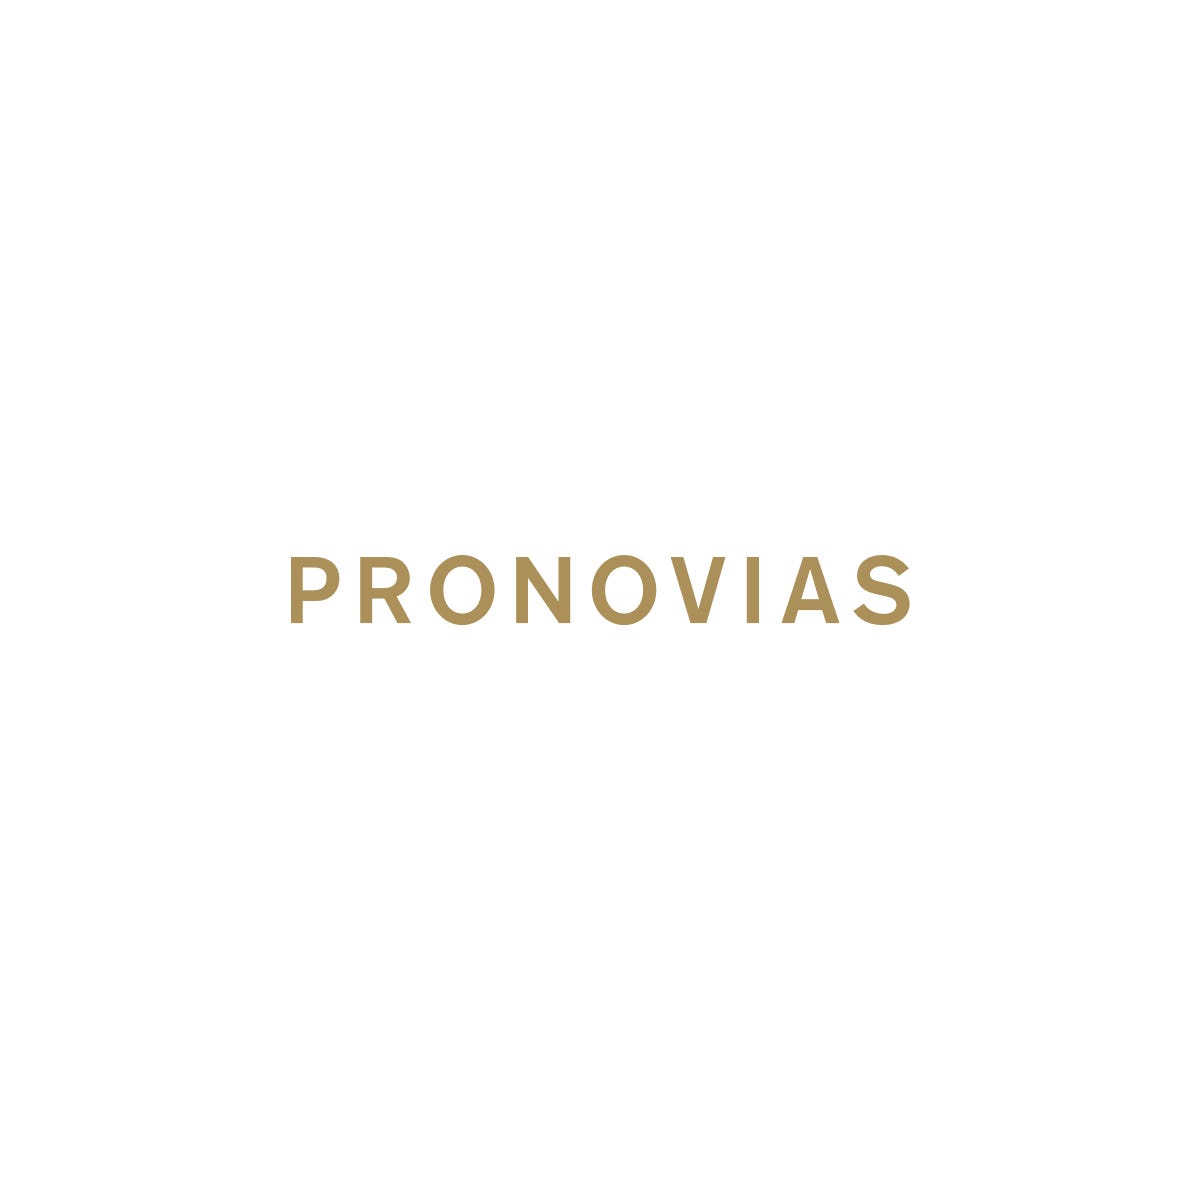 Join Miami's Wedding Event of the Year     pronovias logo 1x  Join Miami's Wedding Event of the Year Join Miami's Wedding Event of the Year